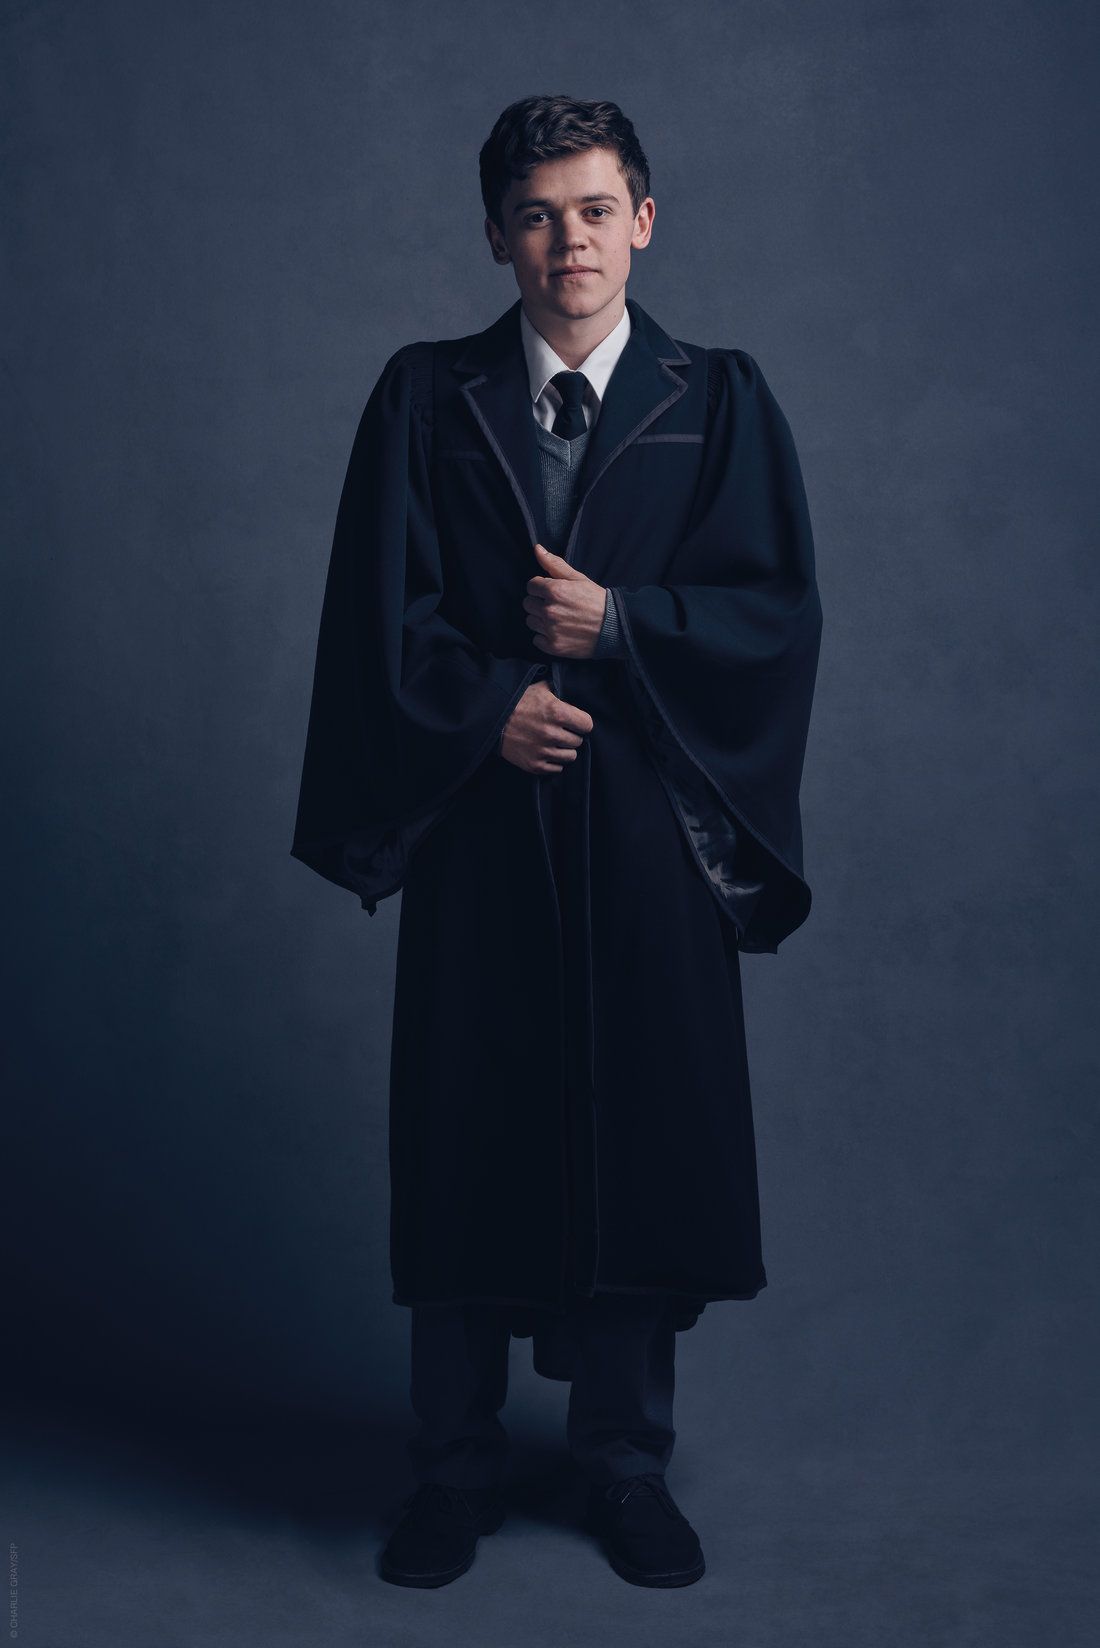 Harry Potter and the Cursed Child Photo 3